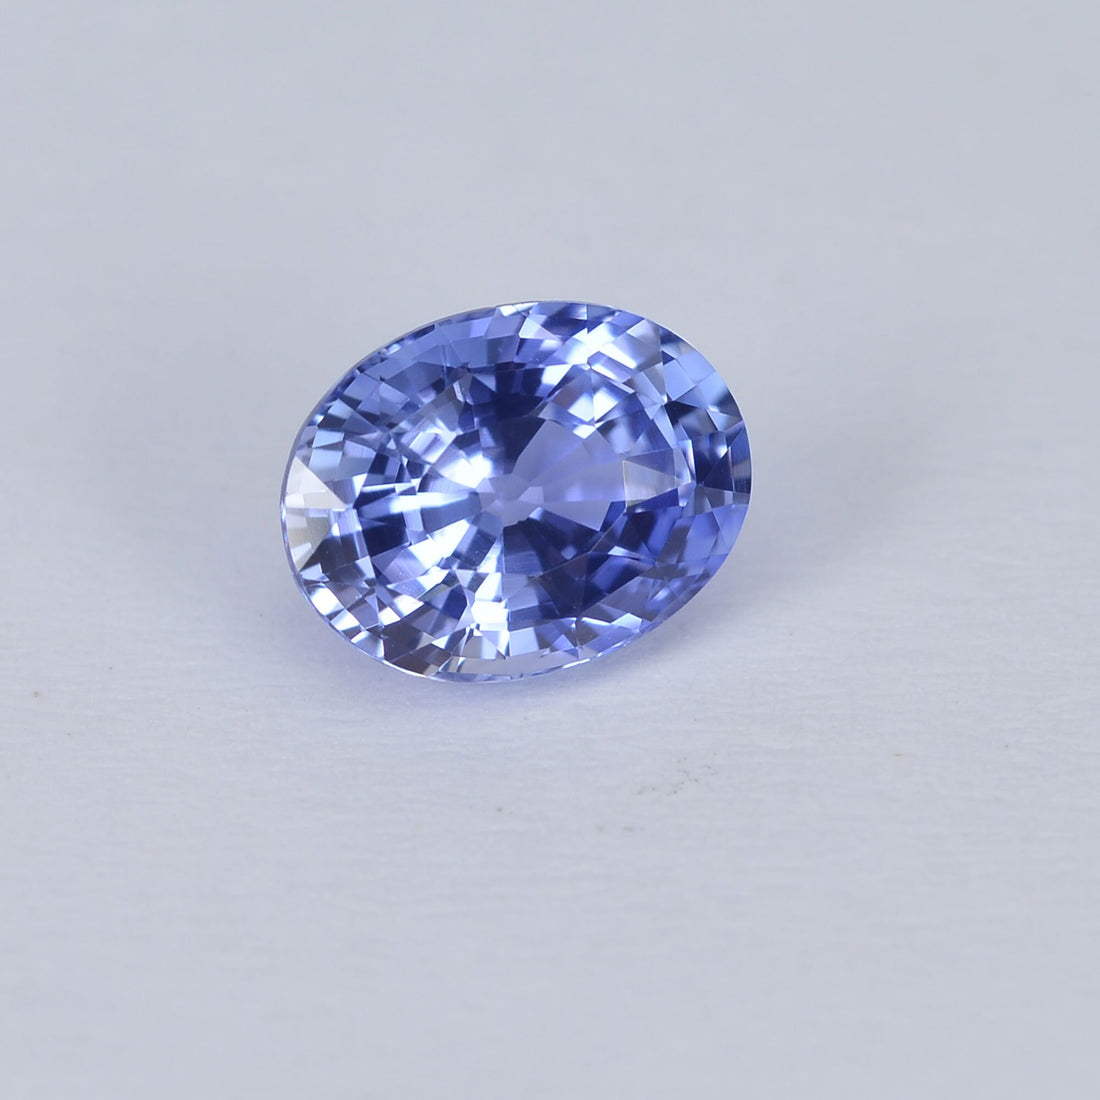 1.32 cts Unheated Natural Blue Sapphire Loose Gemstone Oval Cut Certified